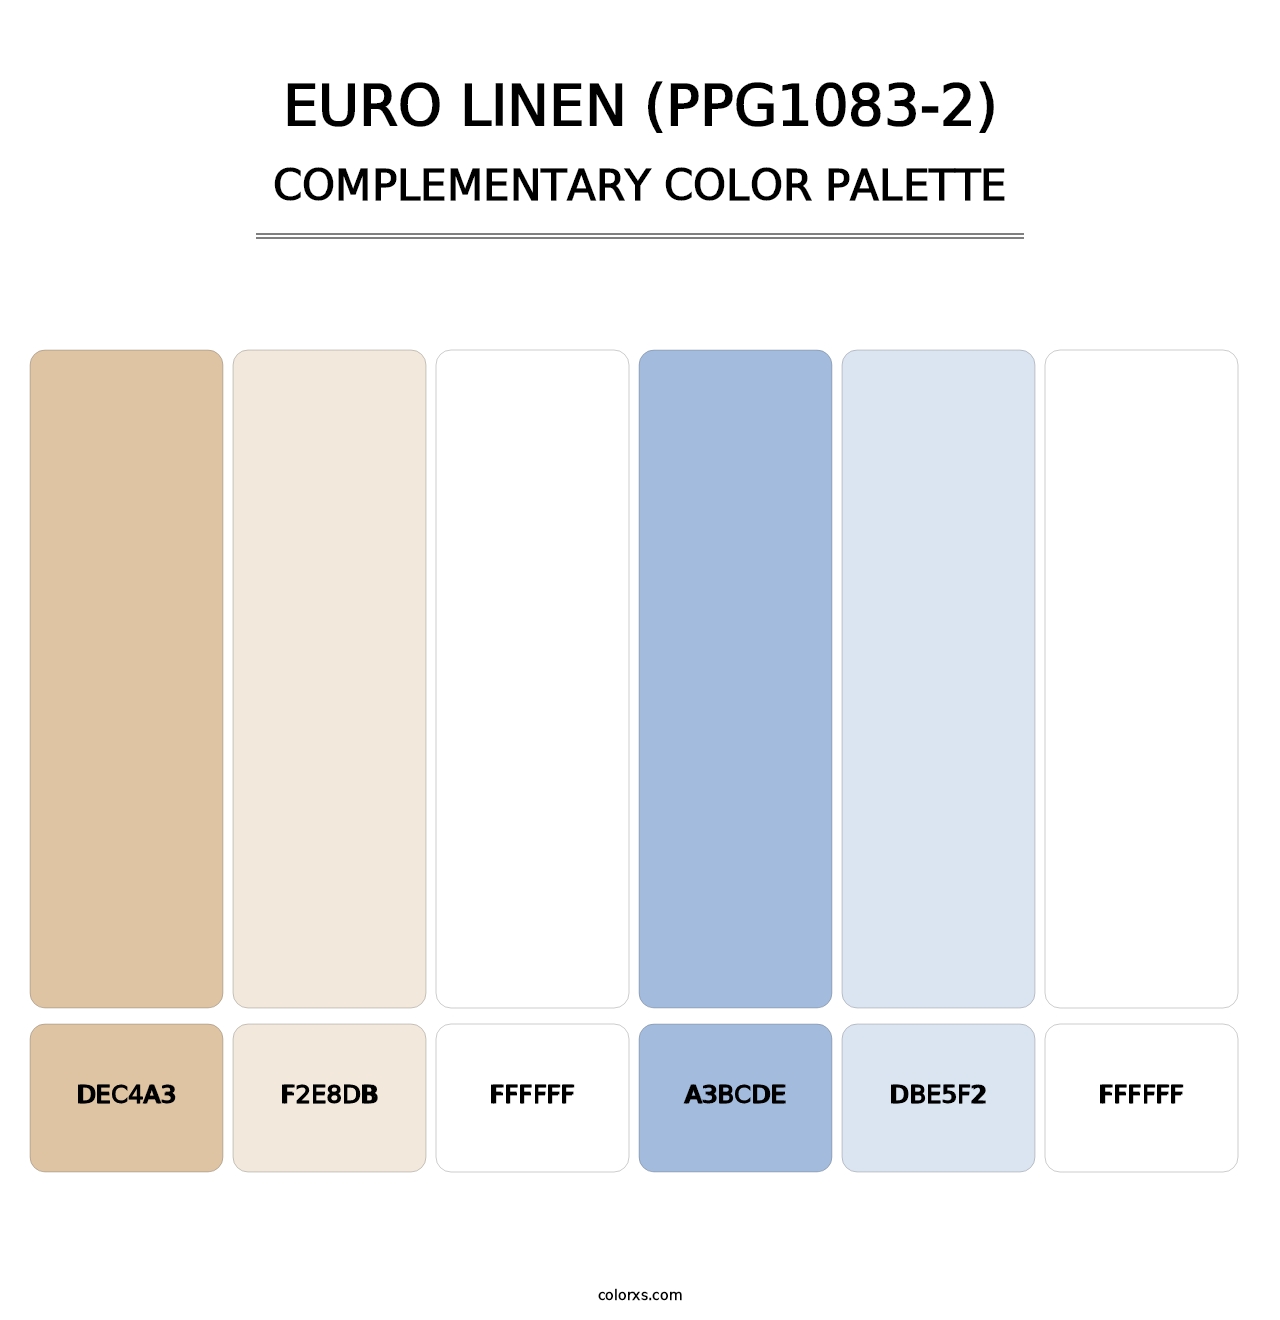 Euro Linen (PPG1083-2) - Complementary Color Palette